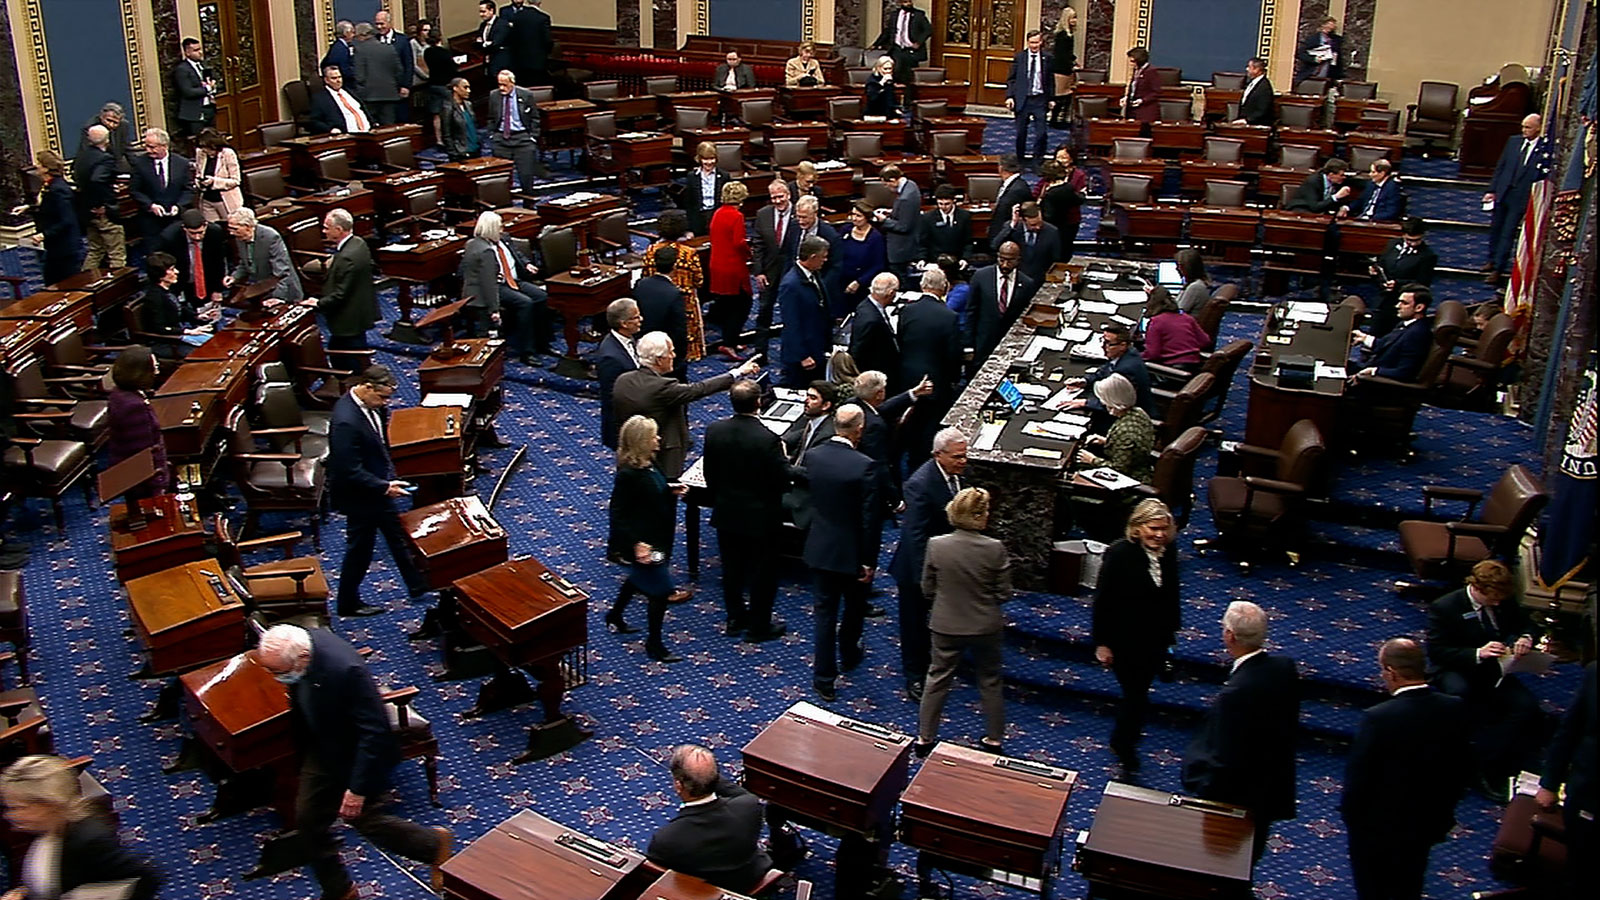 The Senate floor as voting gets underway on Thursday, February 29.